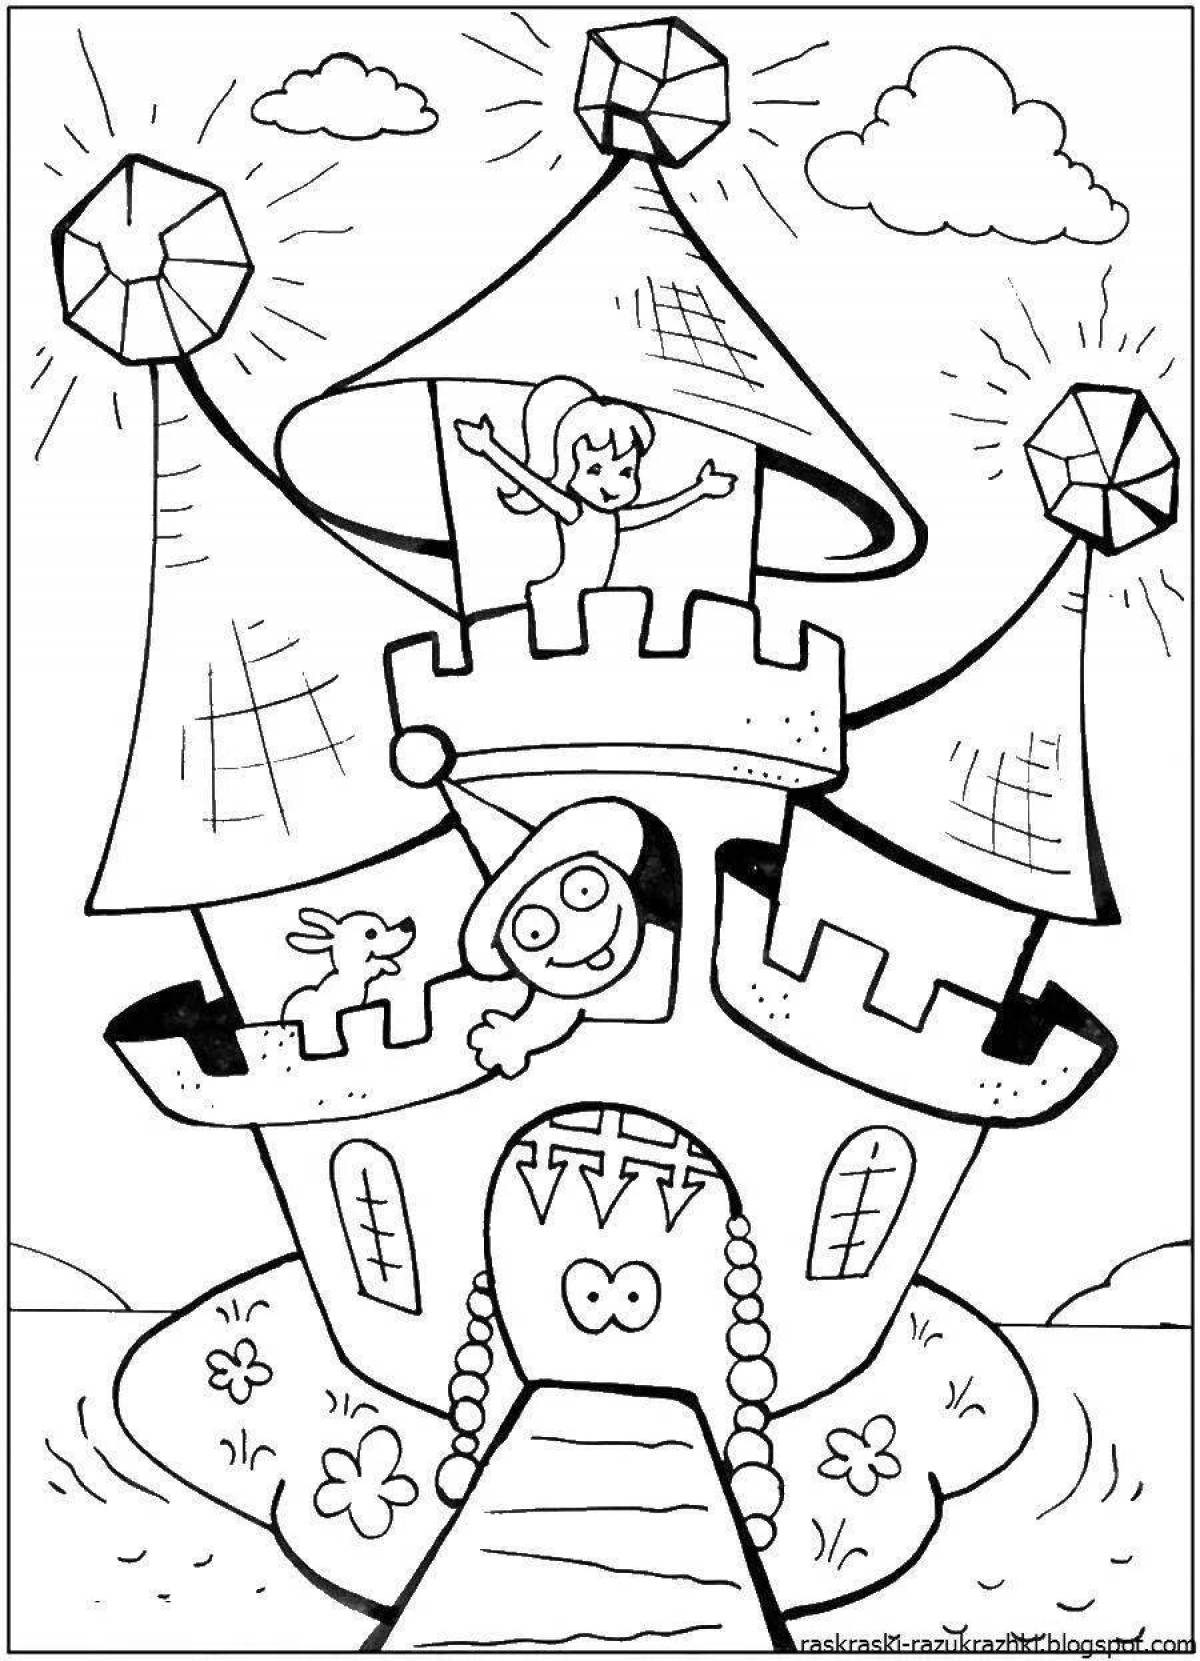 Visual castle coloring book for children 6-7 years old